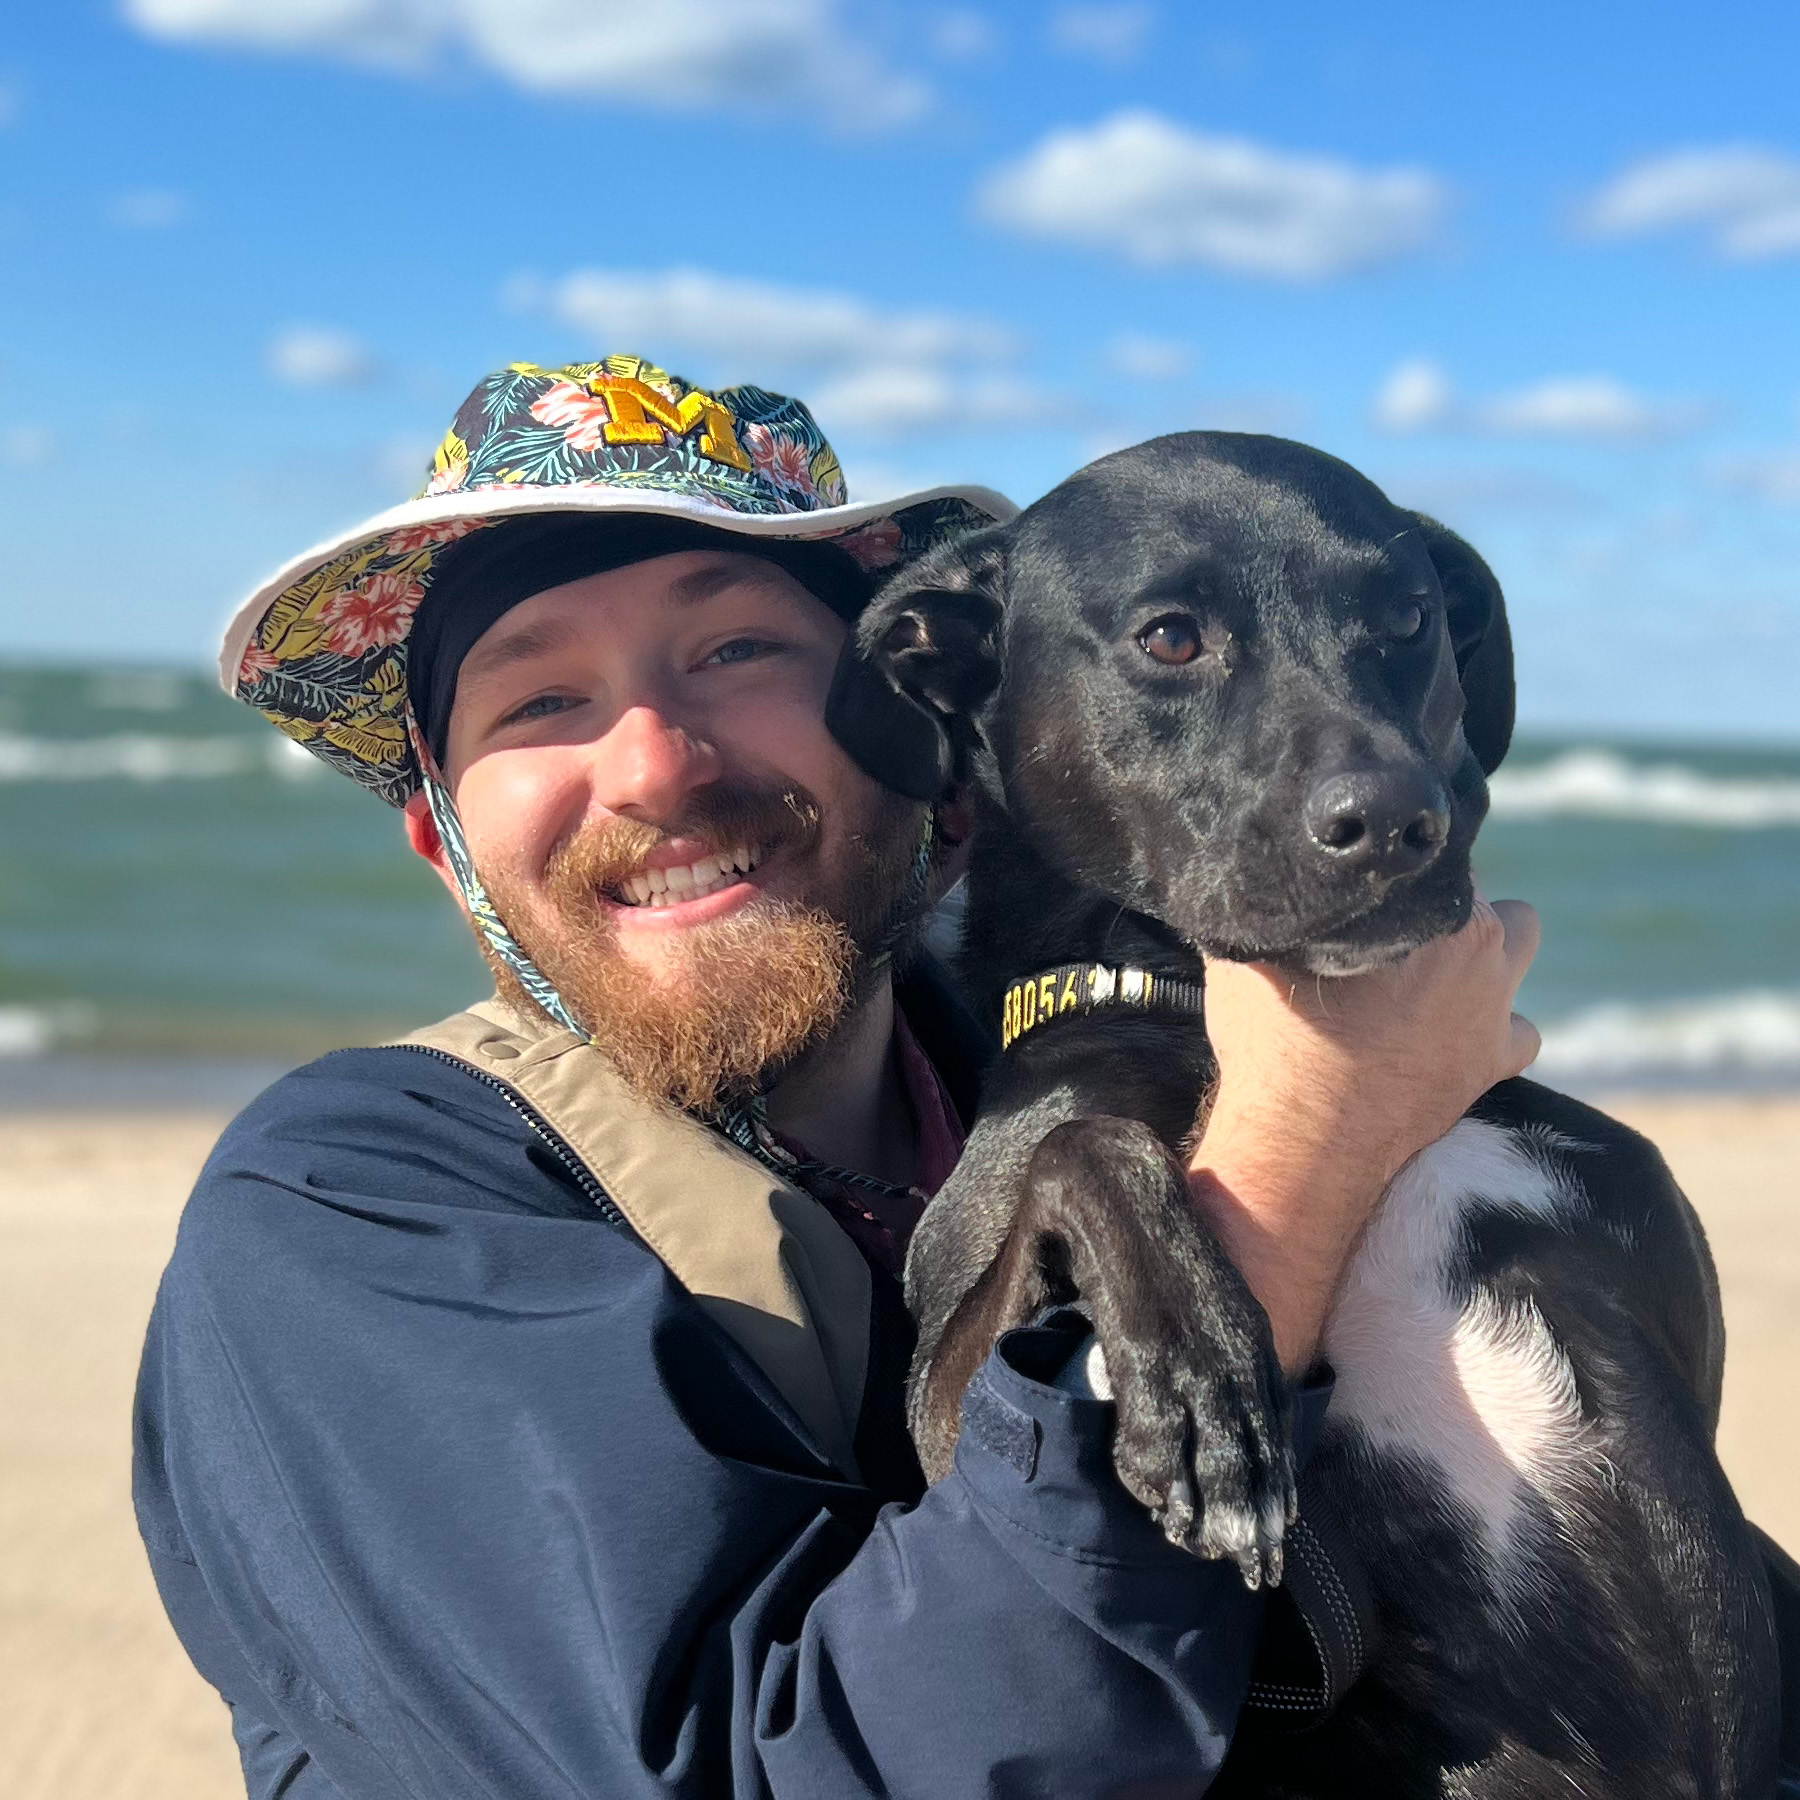 Gregory and his dog, Linux, at the beach